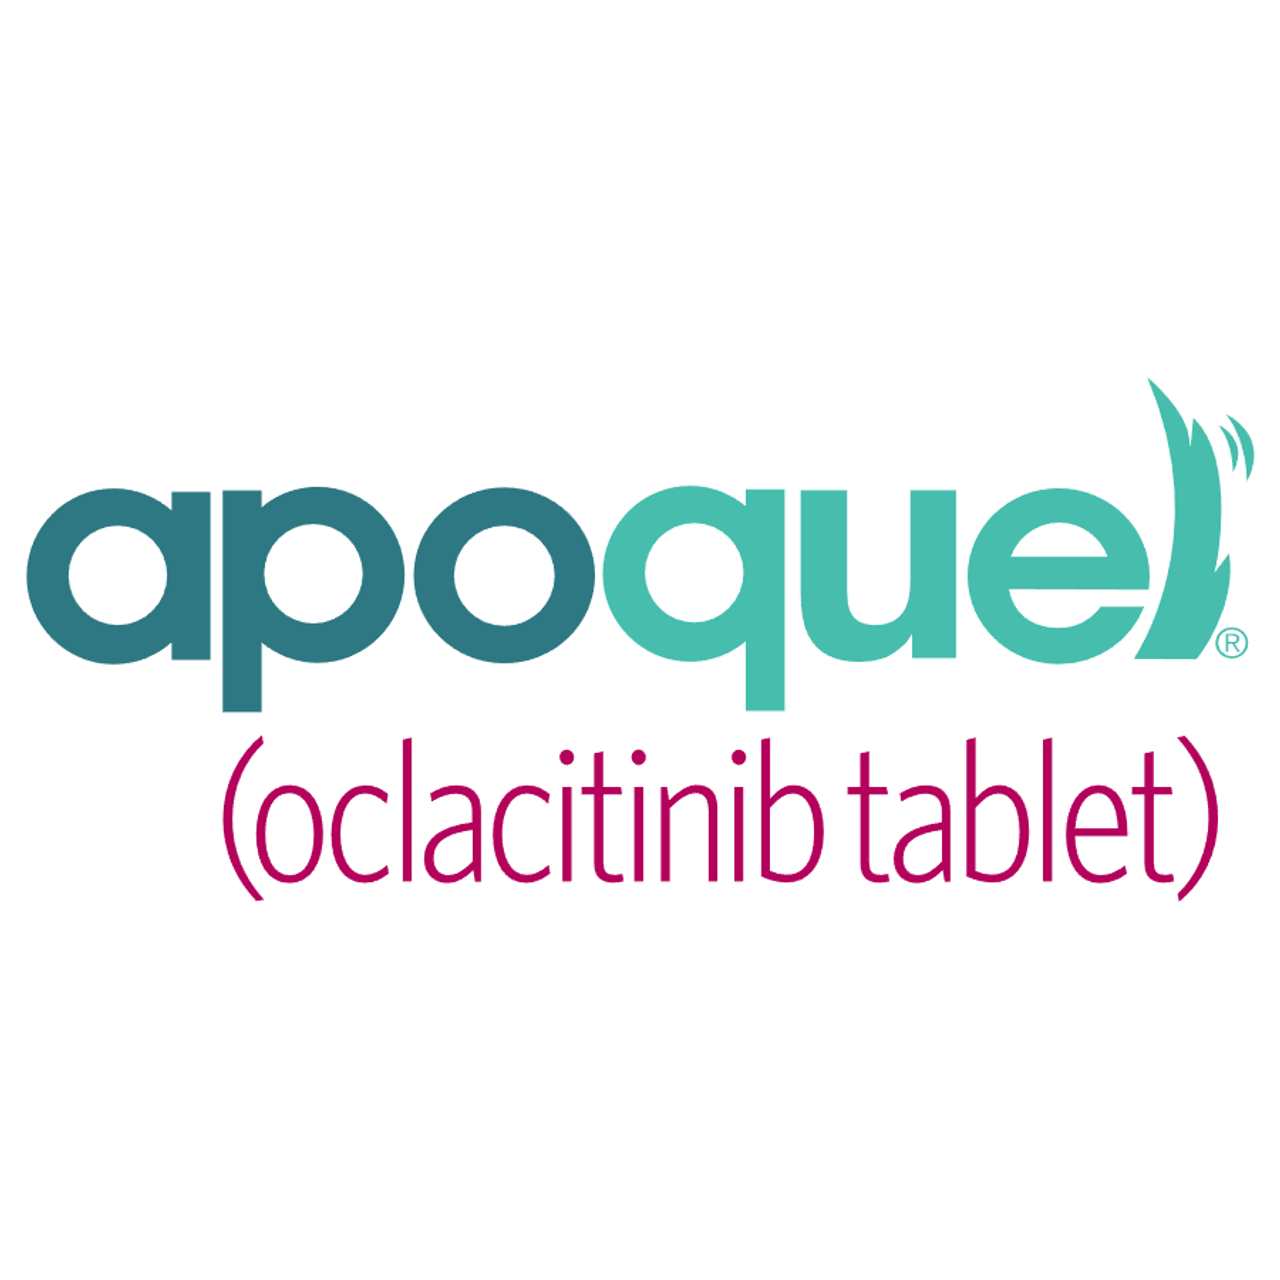 apoquel-16mg-100-tablets-pet-care-pharmacy-lowest-price-guarantee